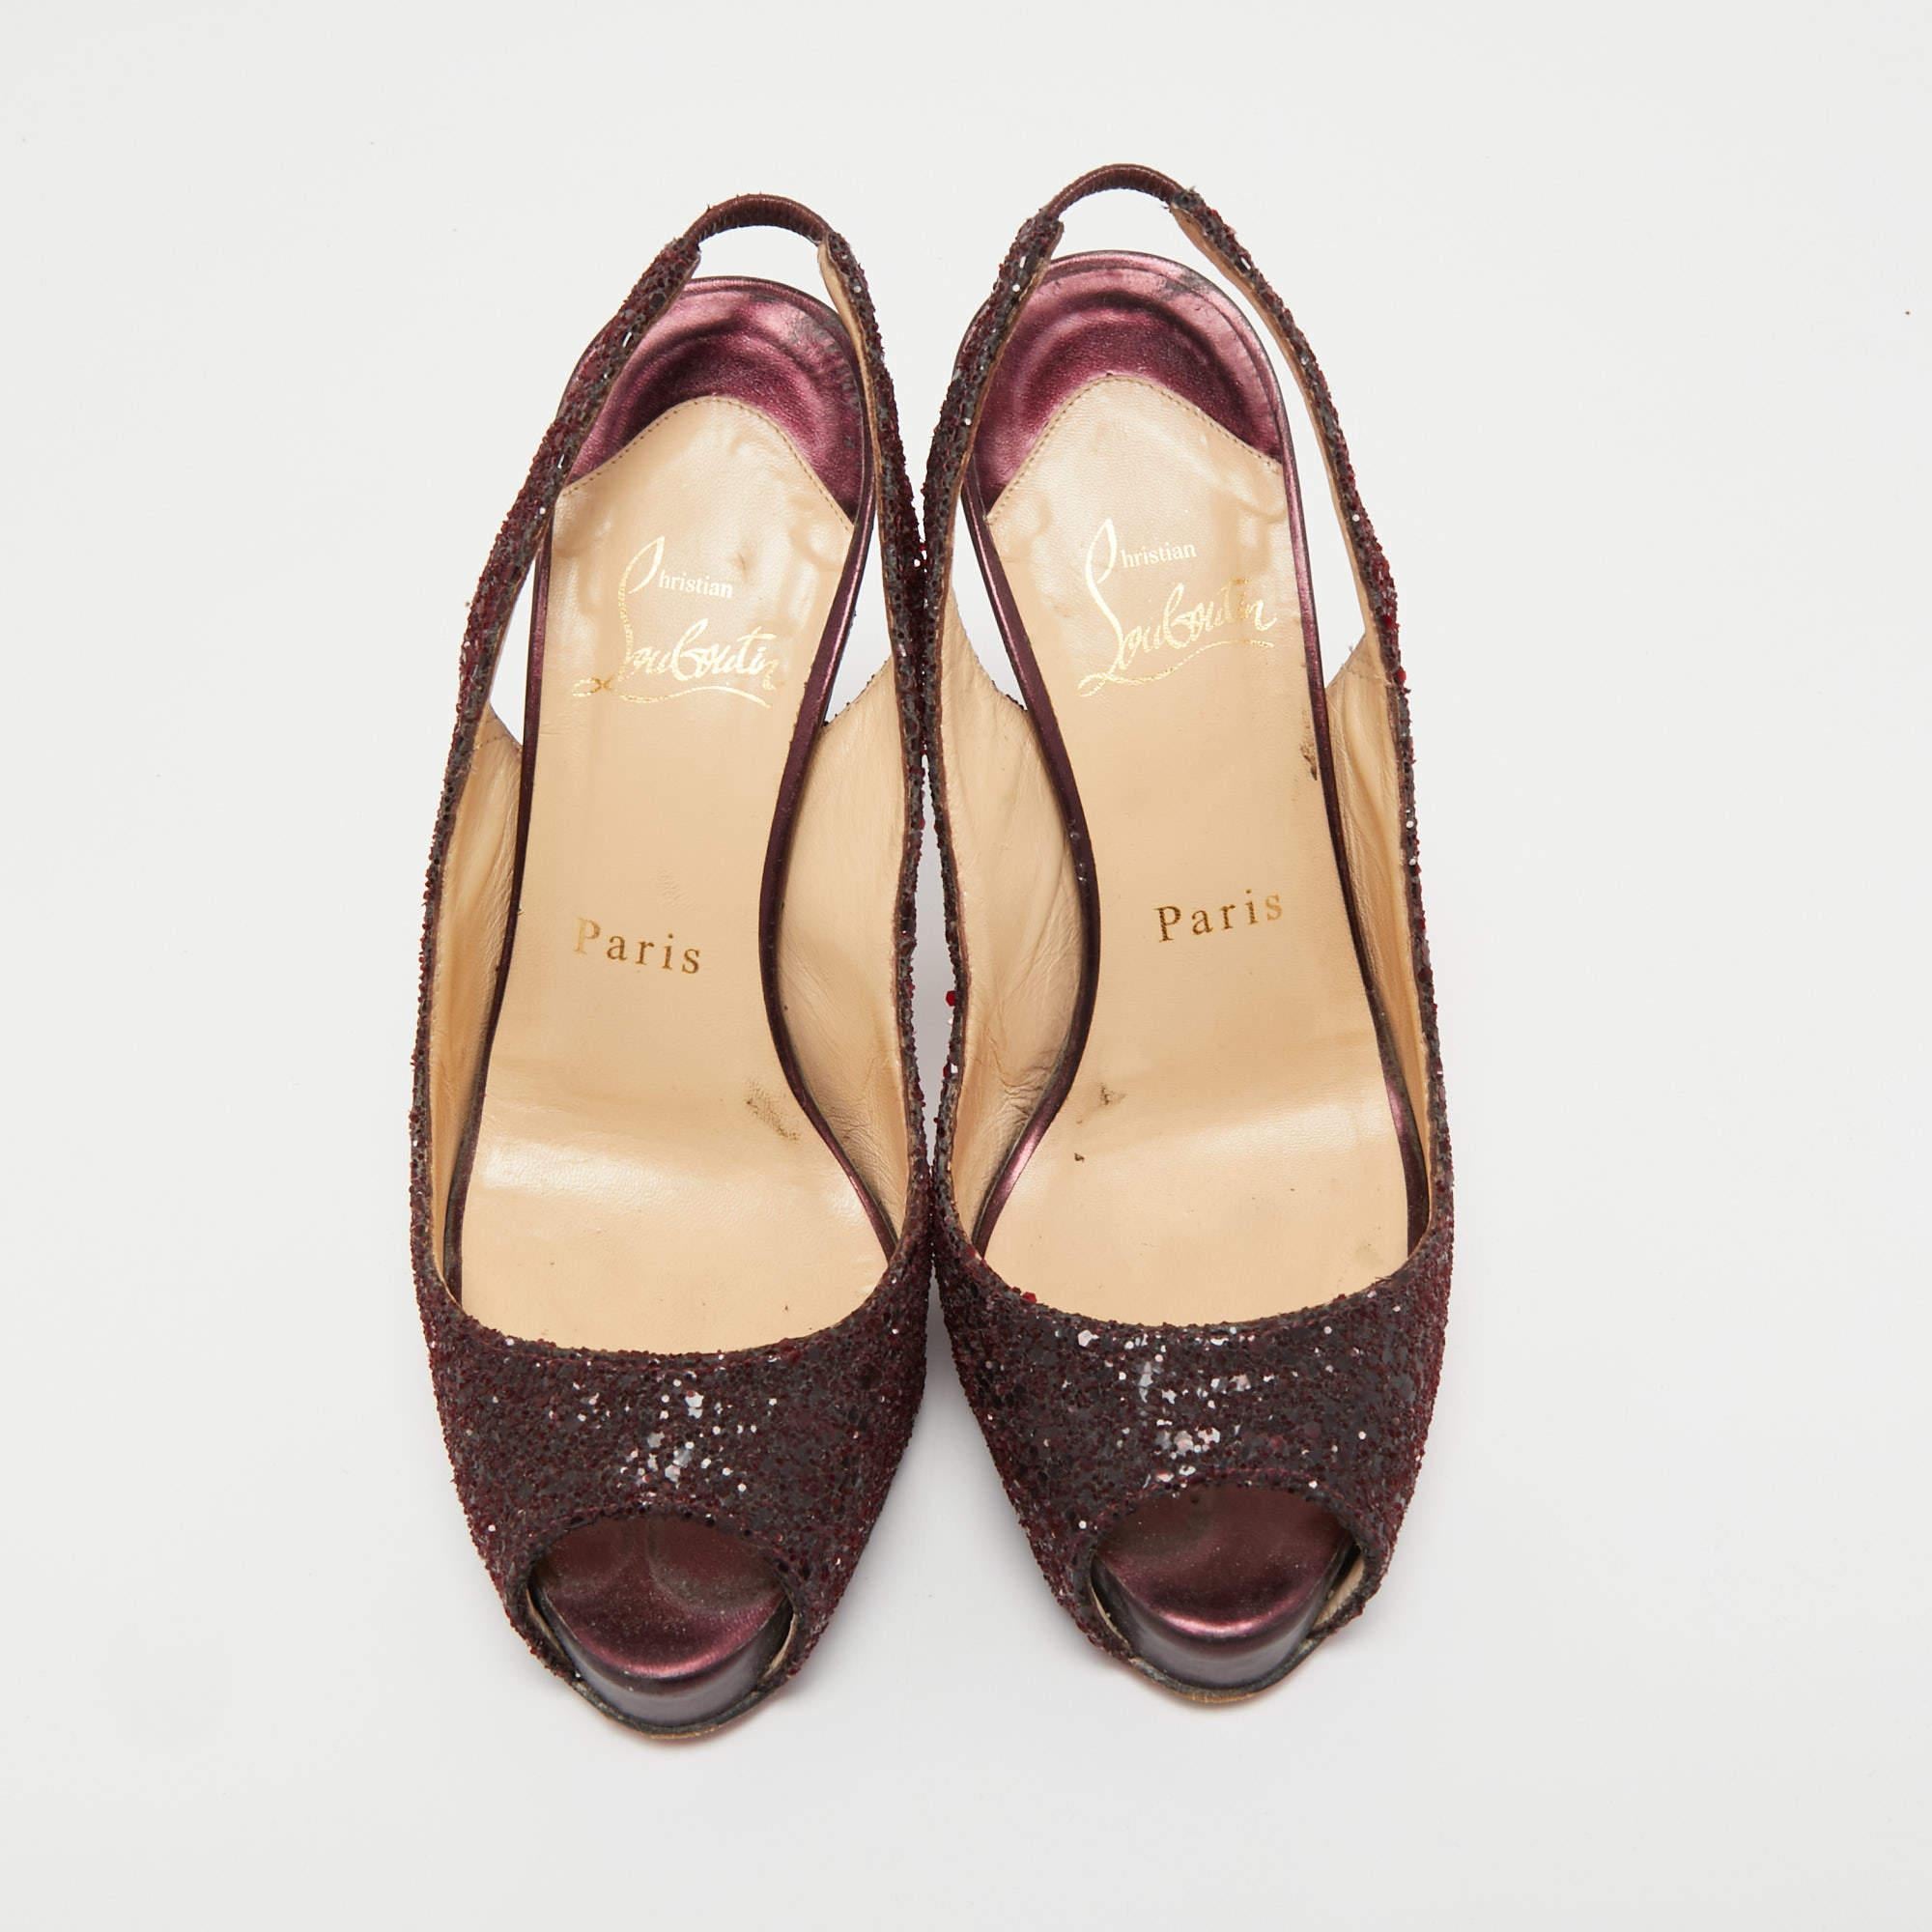 Pumps like these will help you walk with confidence and elegance. Crafted from high-quality materials, these pumps are set on tall heels. Style them with your formal or dressy outfits.

